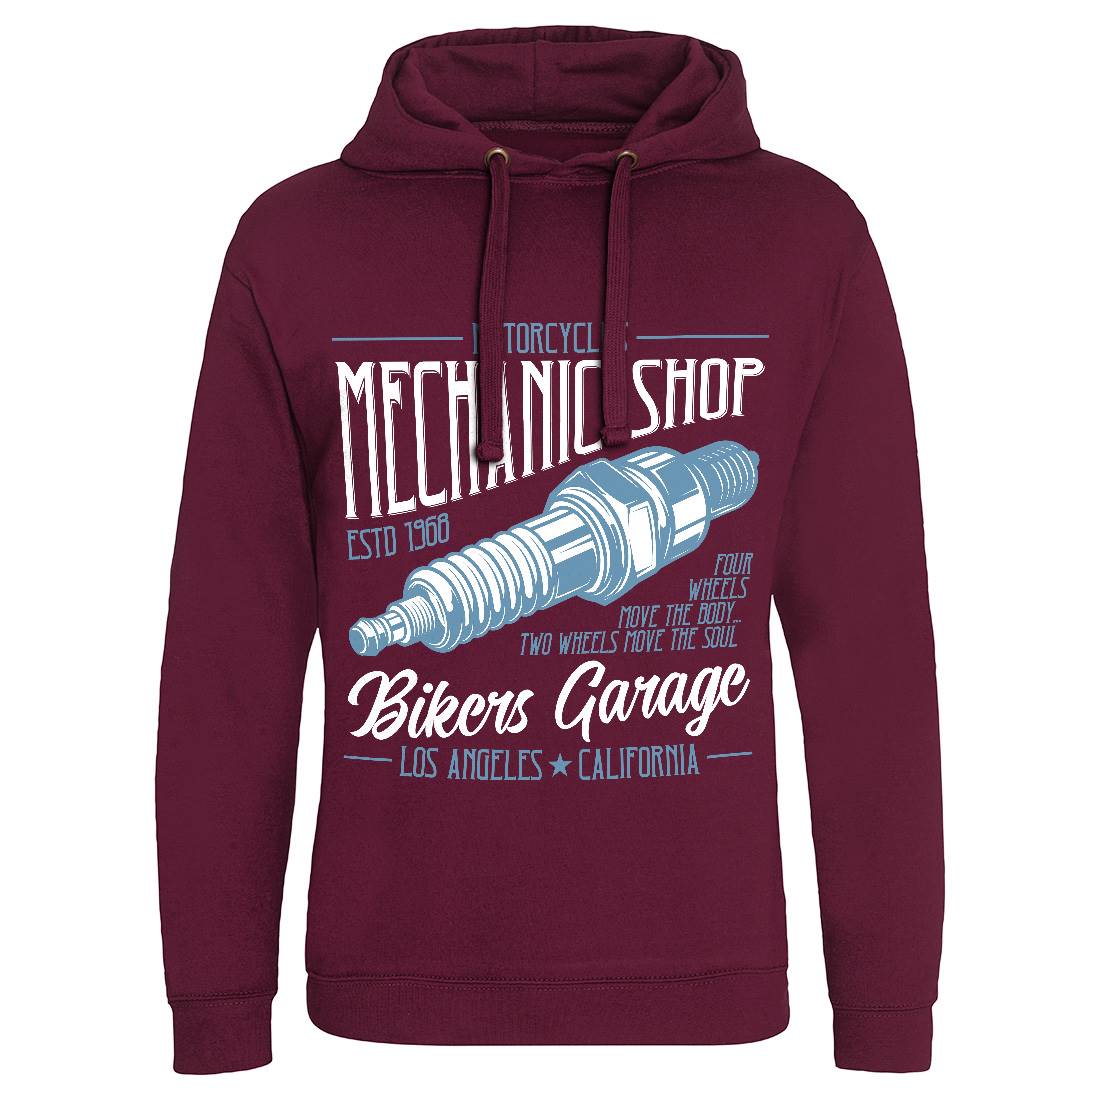 Mechanic Shop Mens Hoodie Without Pocket Motorcycles B836